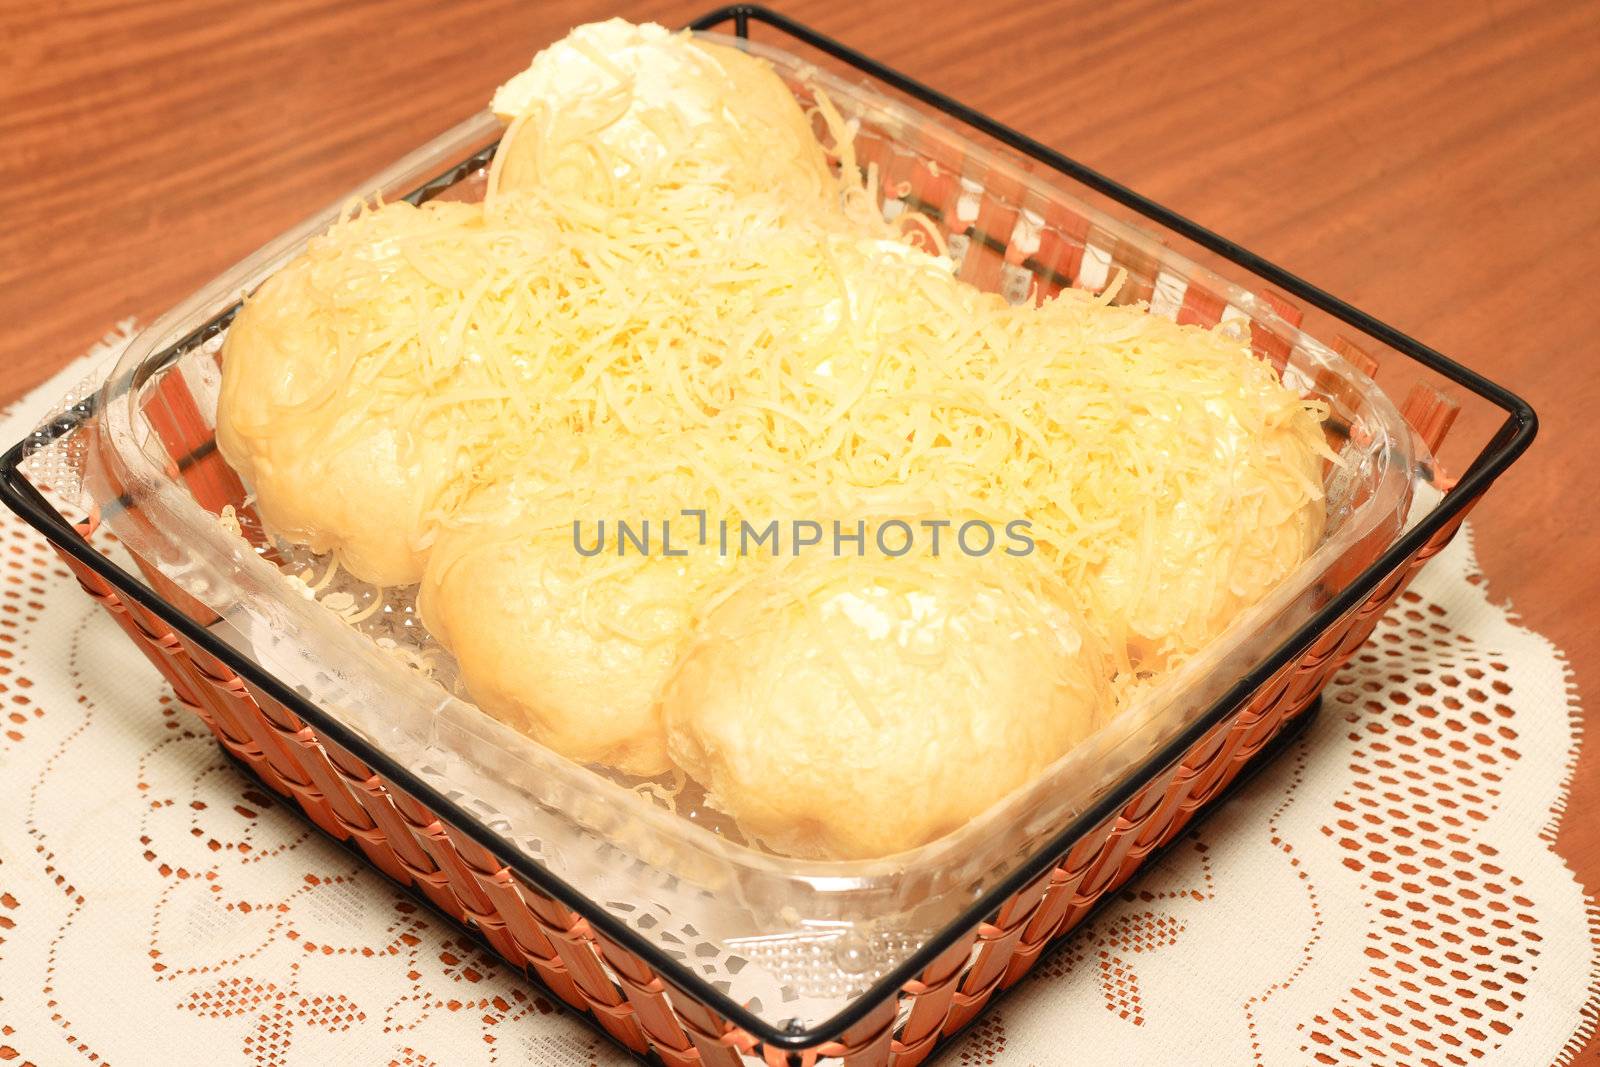 filipino sweet bread topped with lots of cheese and butter
